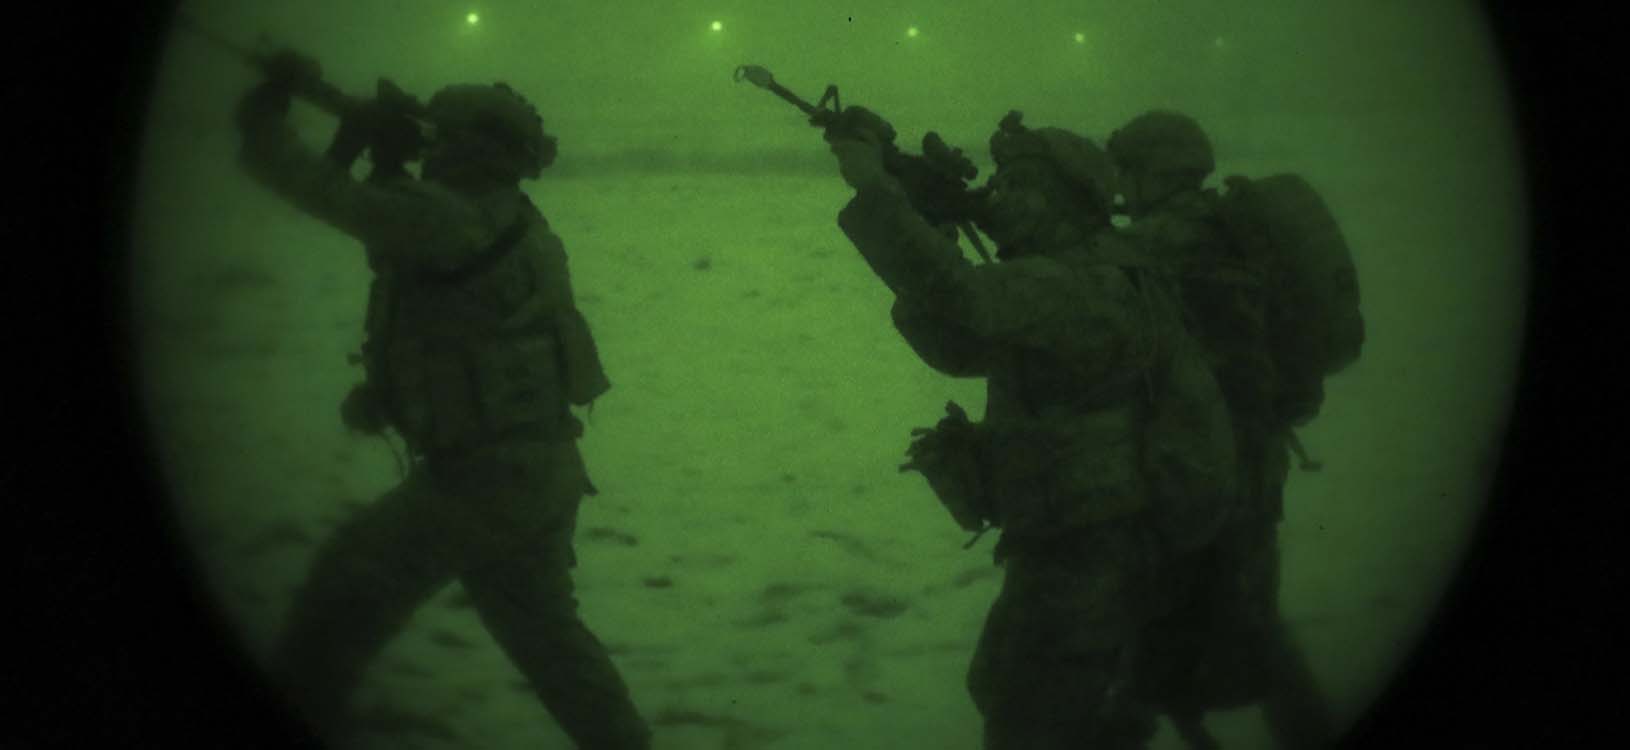 Infrared illumination for night vision devices